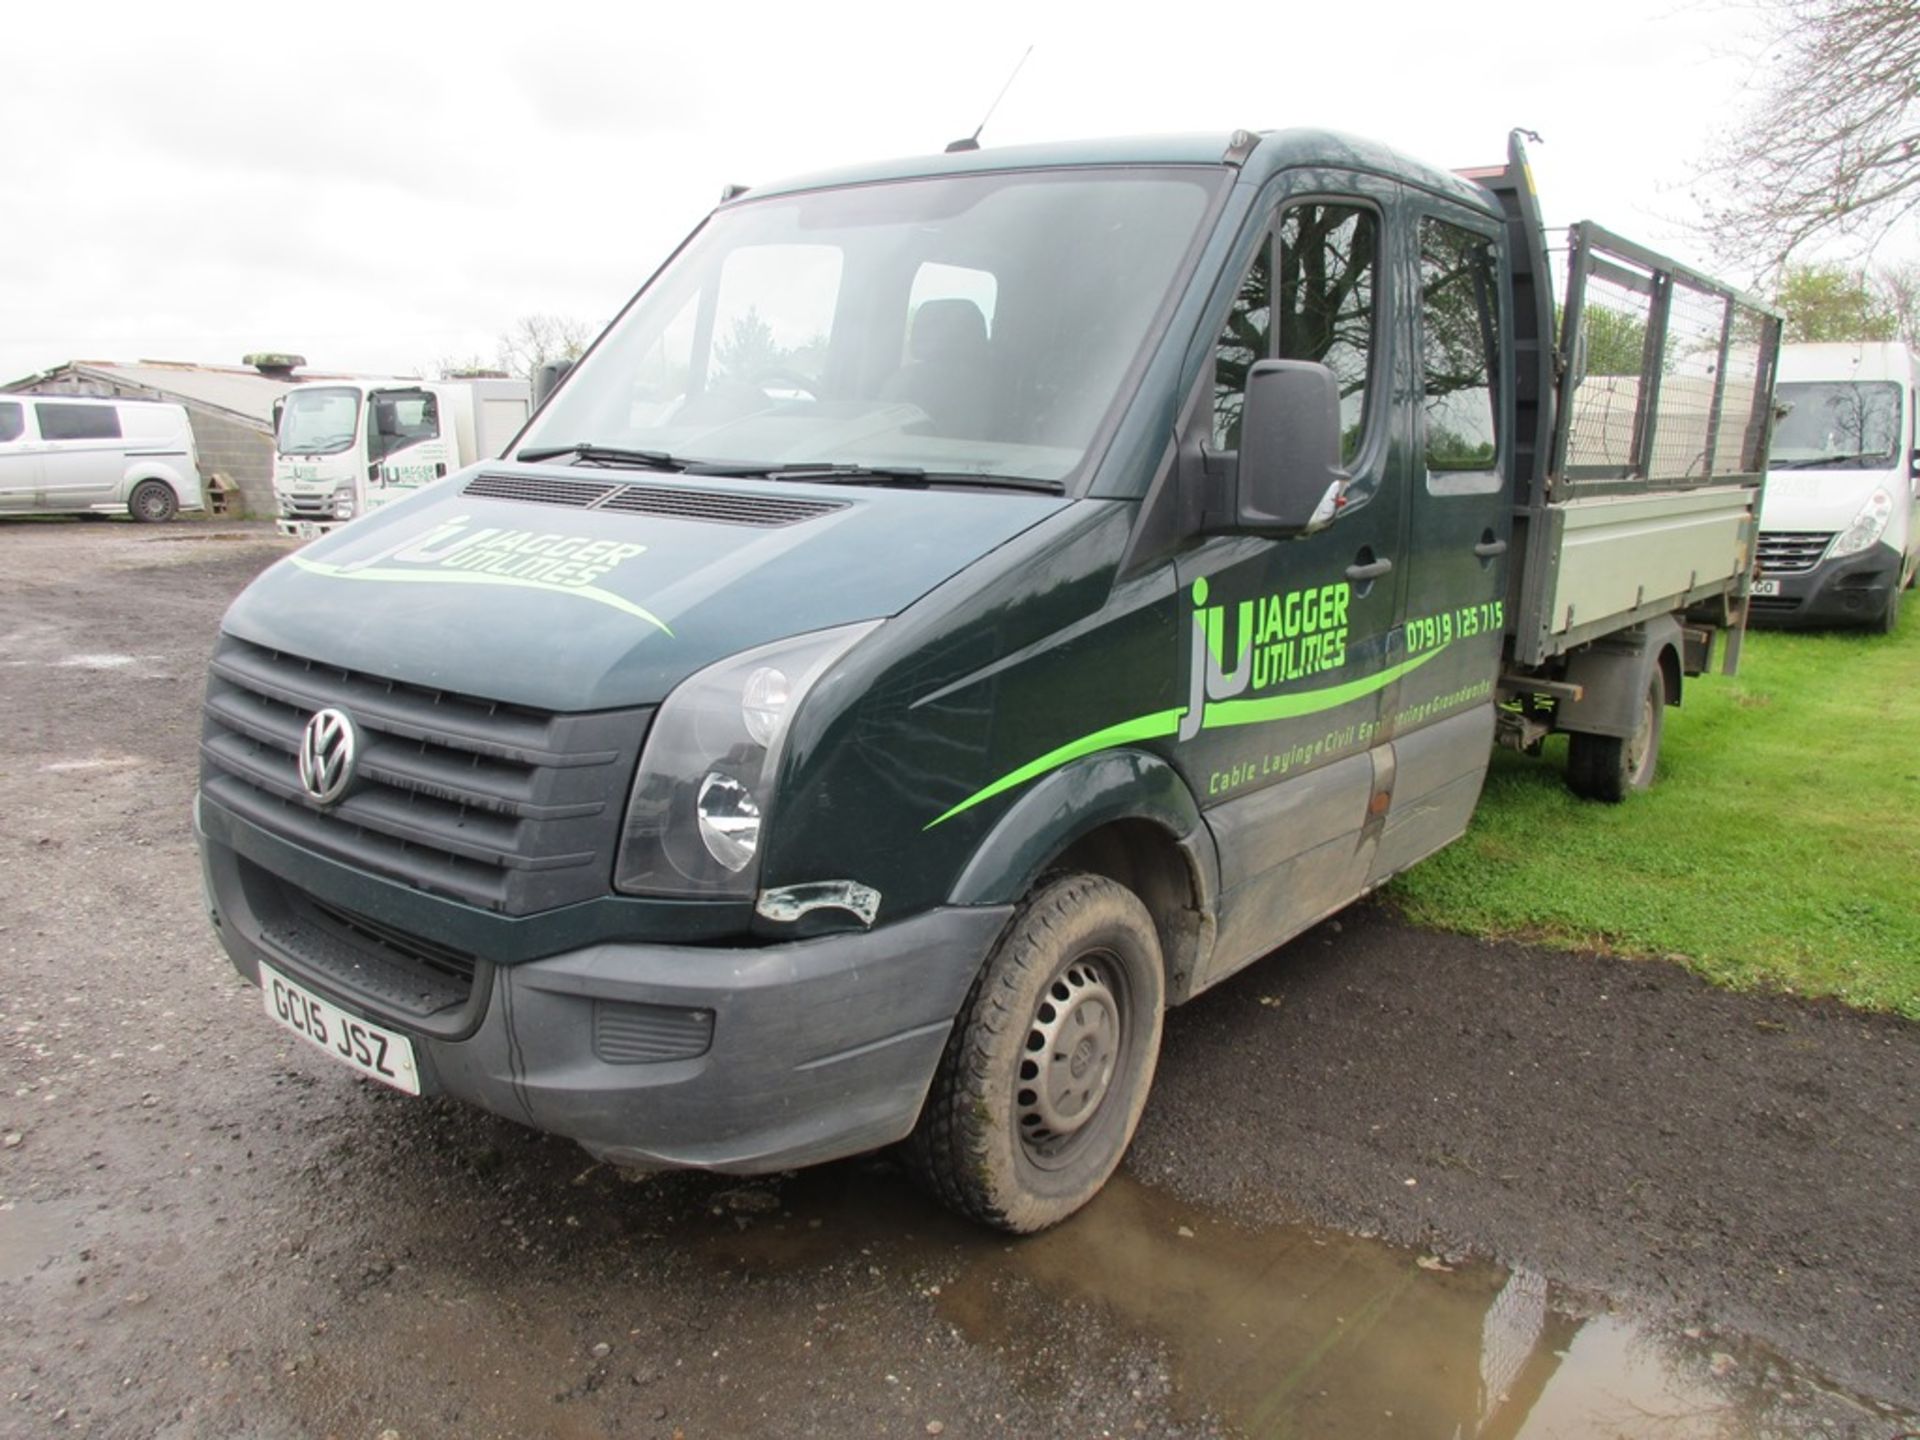 Volkswagen Crafter CR35 2.0 TDI LWB dropside, 107bhp (13/08/2015) - Image 2 of 19